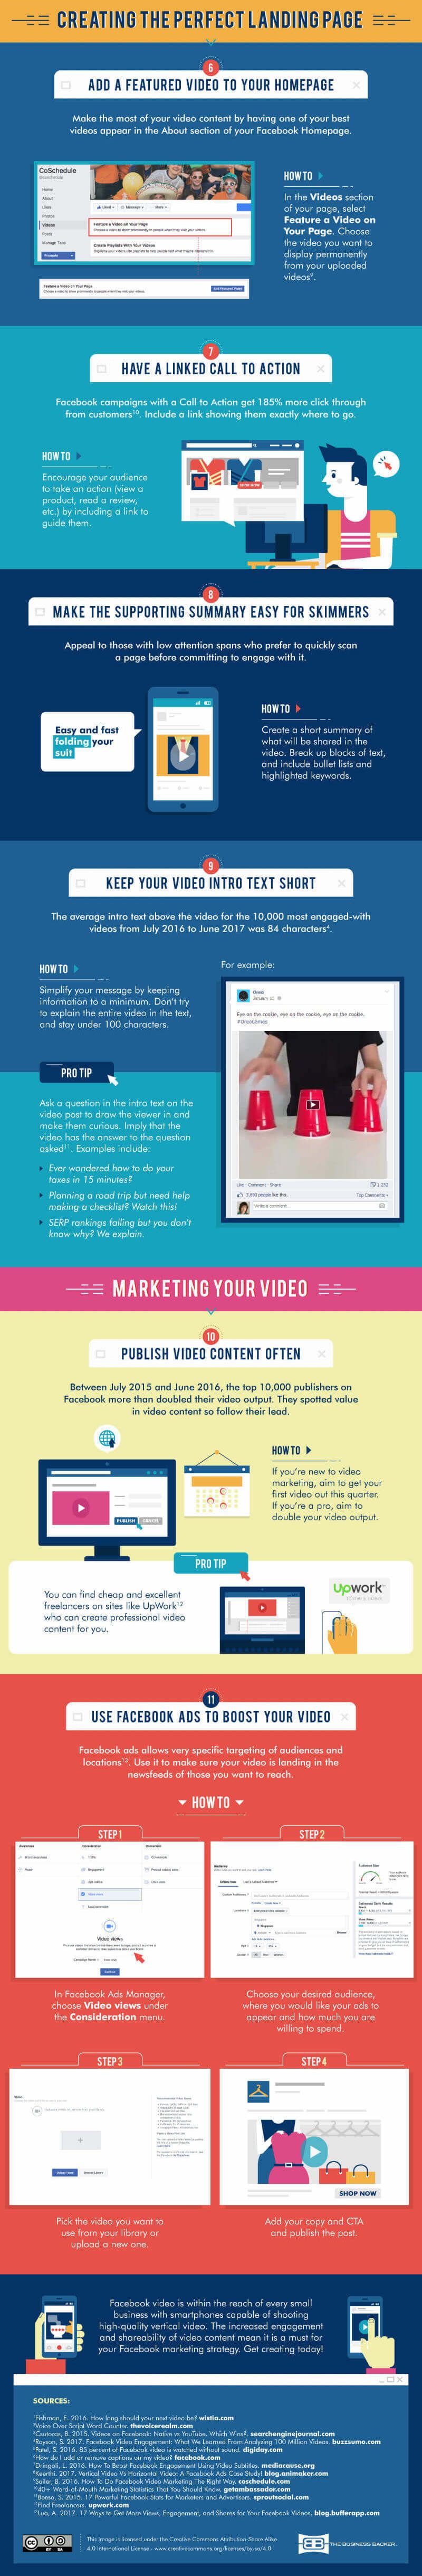 Design a small business guide to facebook video marketing 1